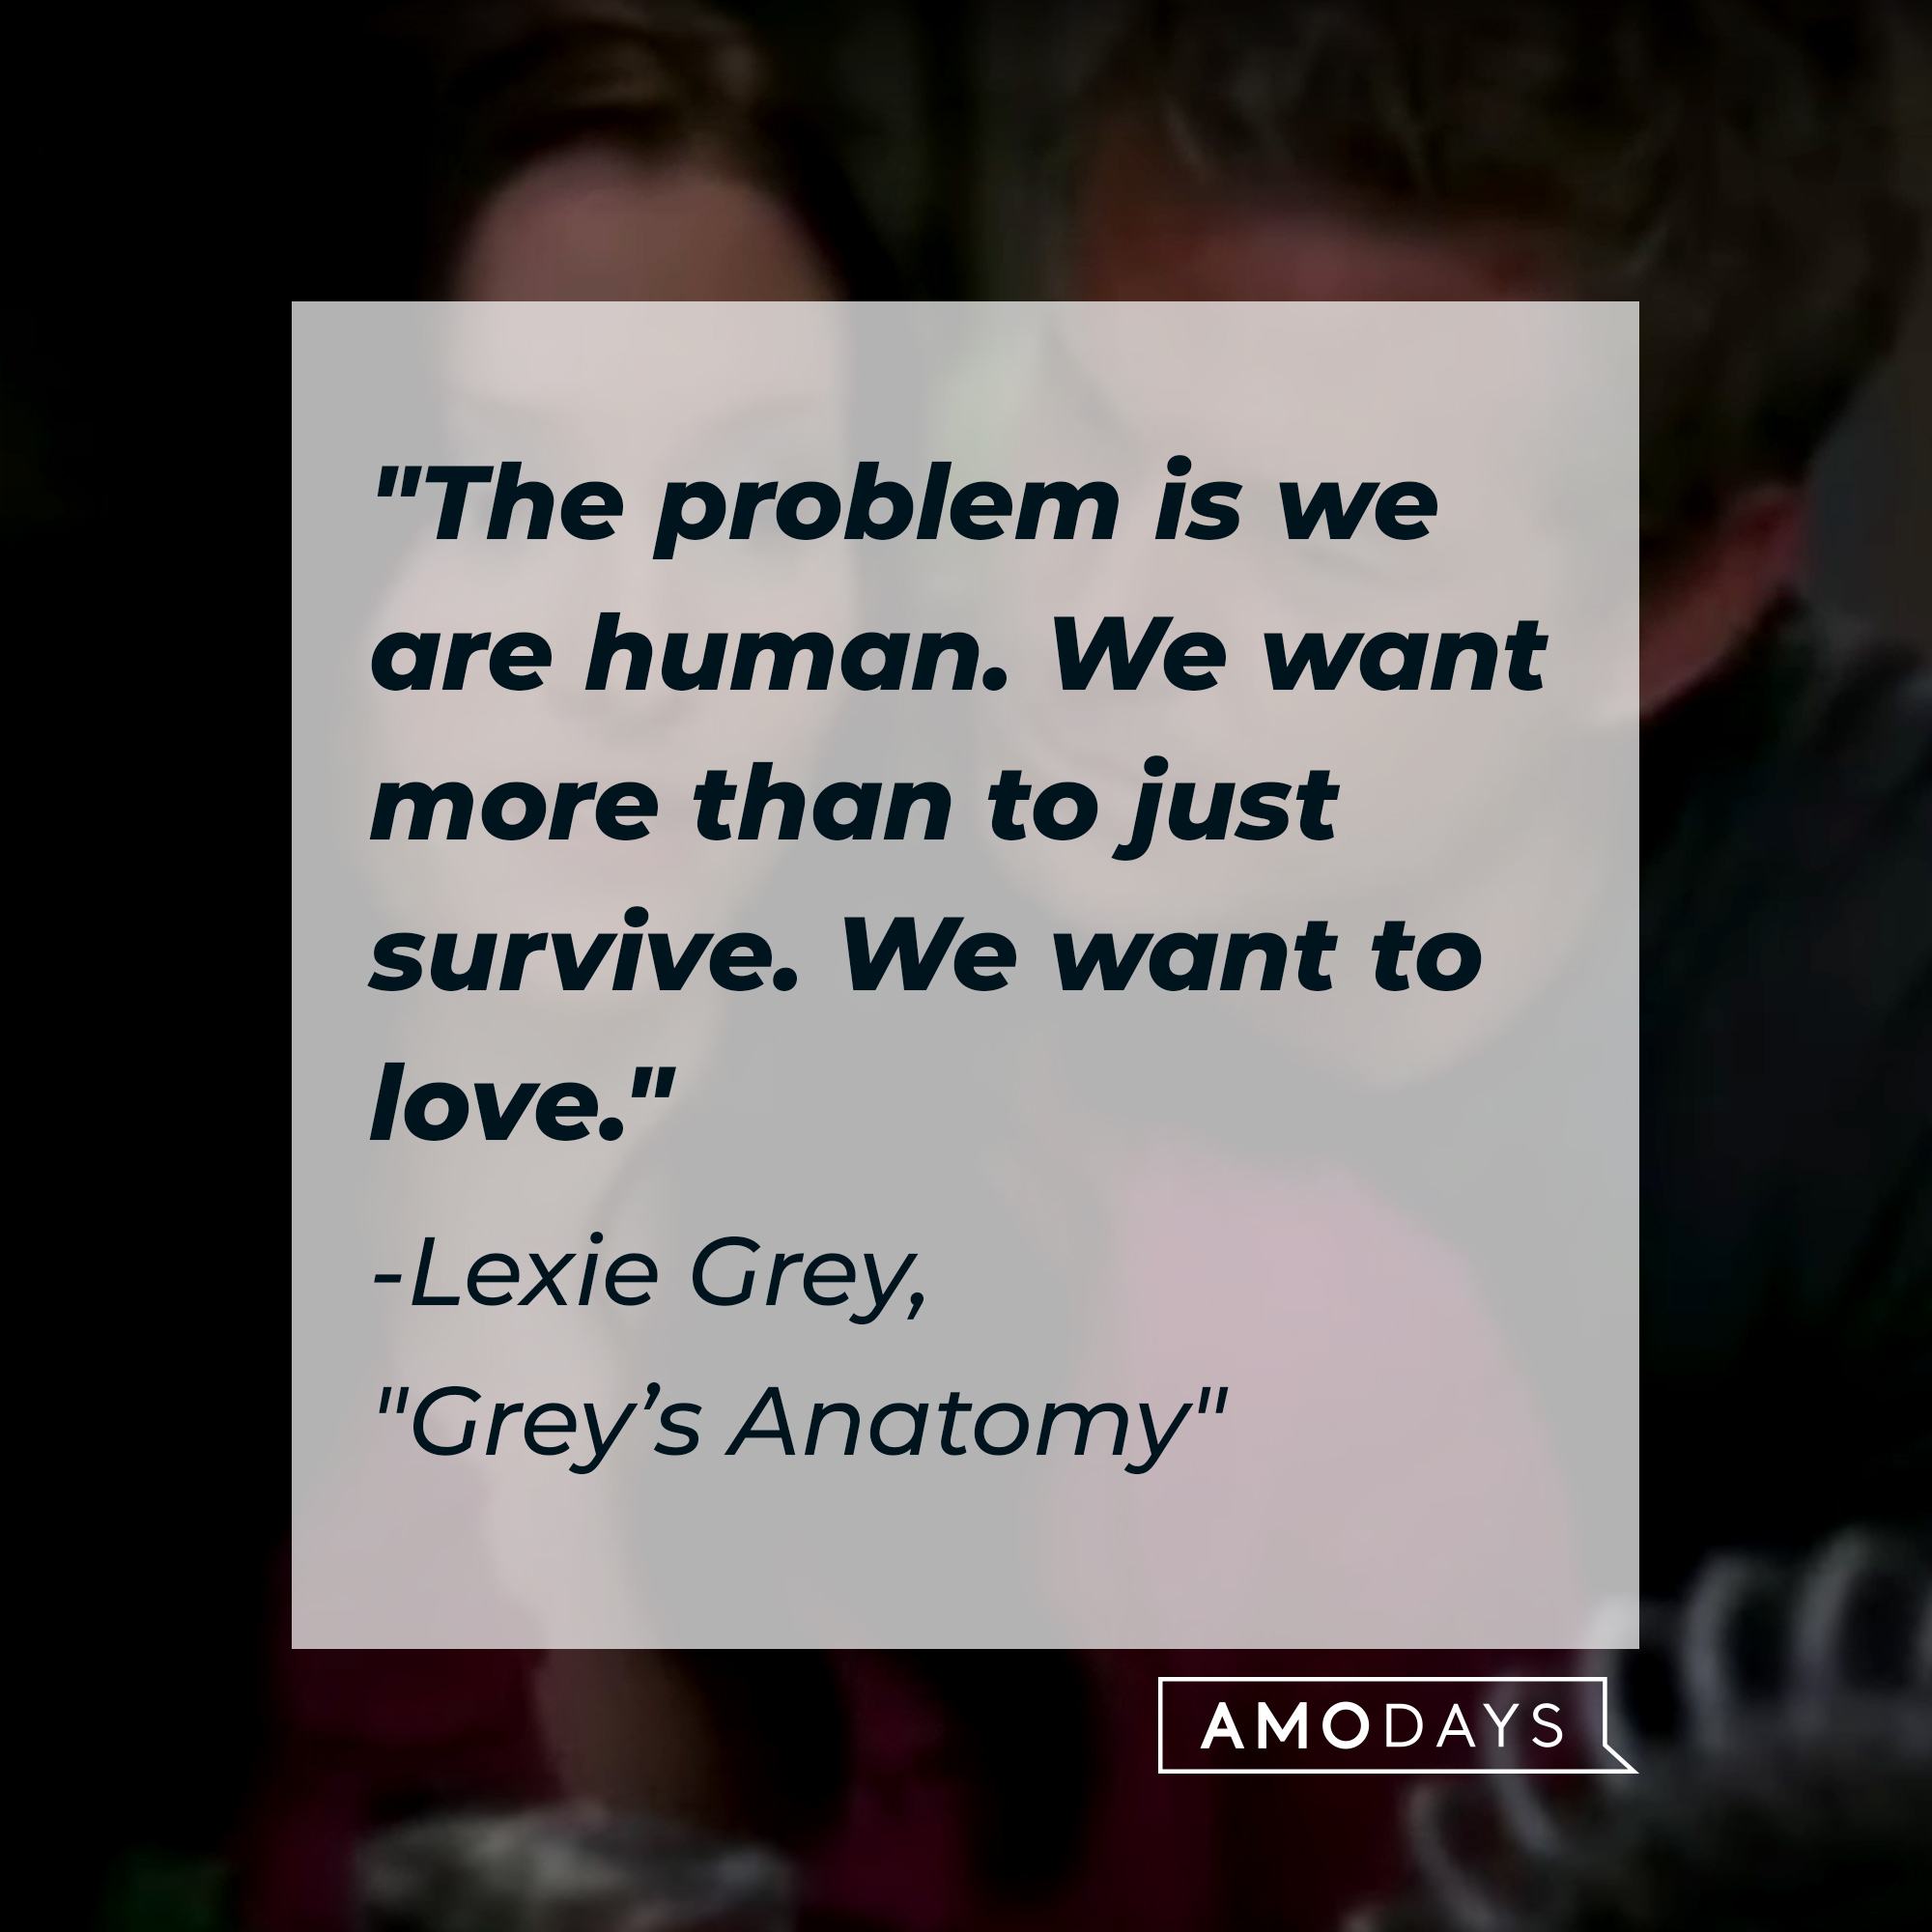 Lexie Grey with her quote: "The problem is we are human. We want more than to just survive. We want to love." | Source: Facebook.com/GreysAnatomy